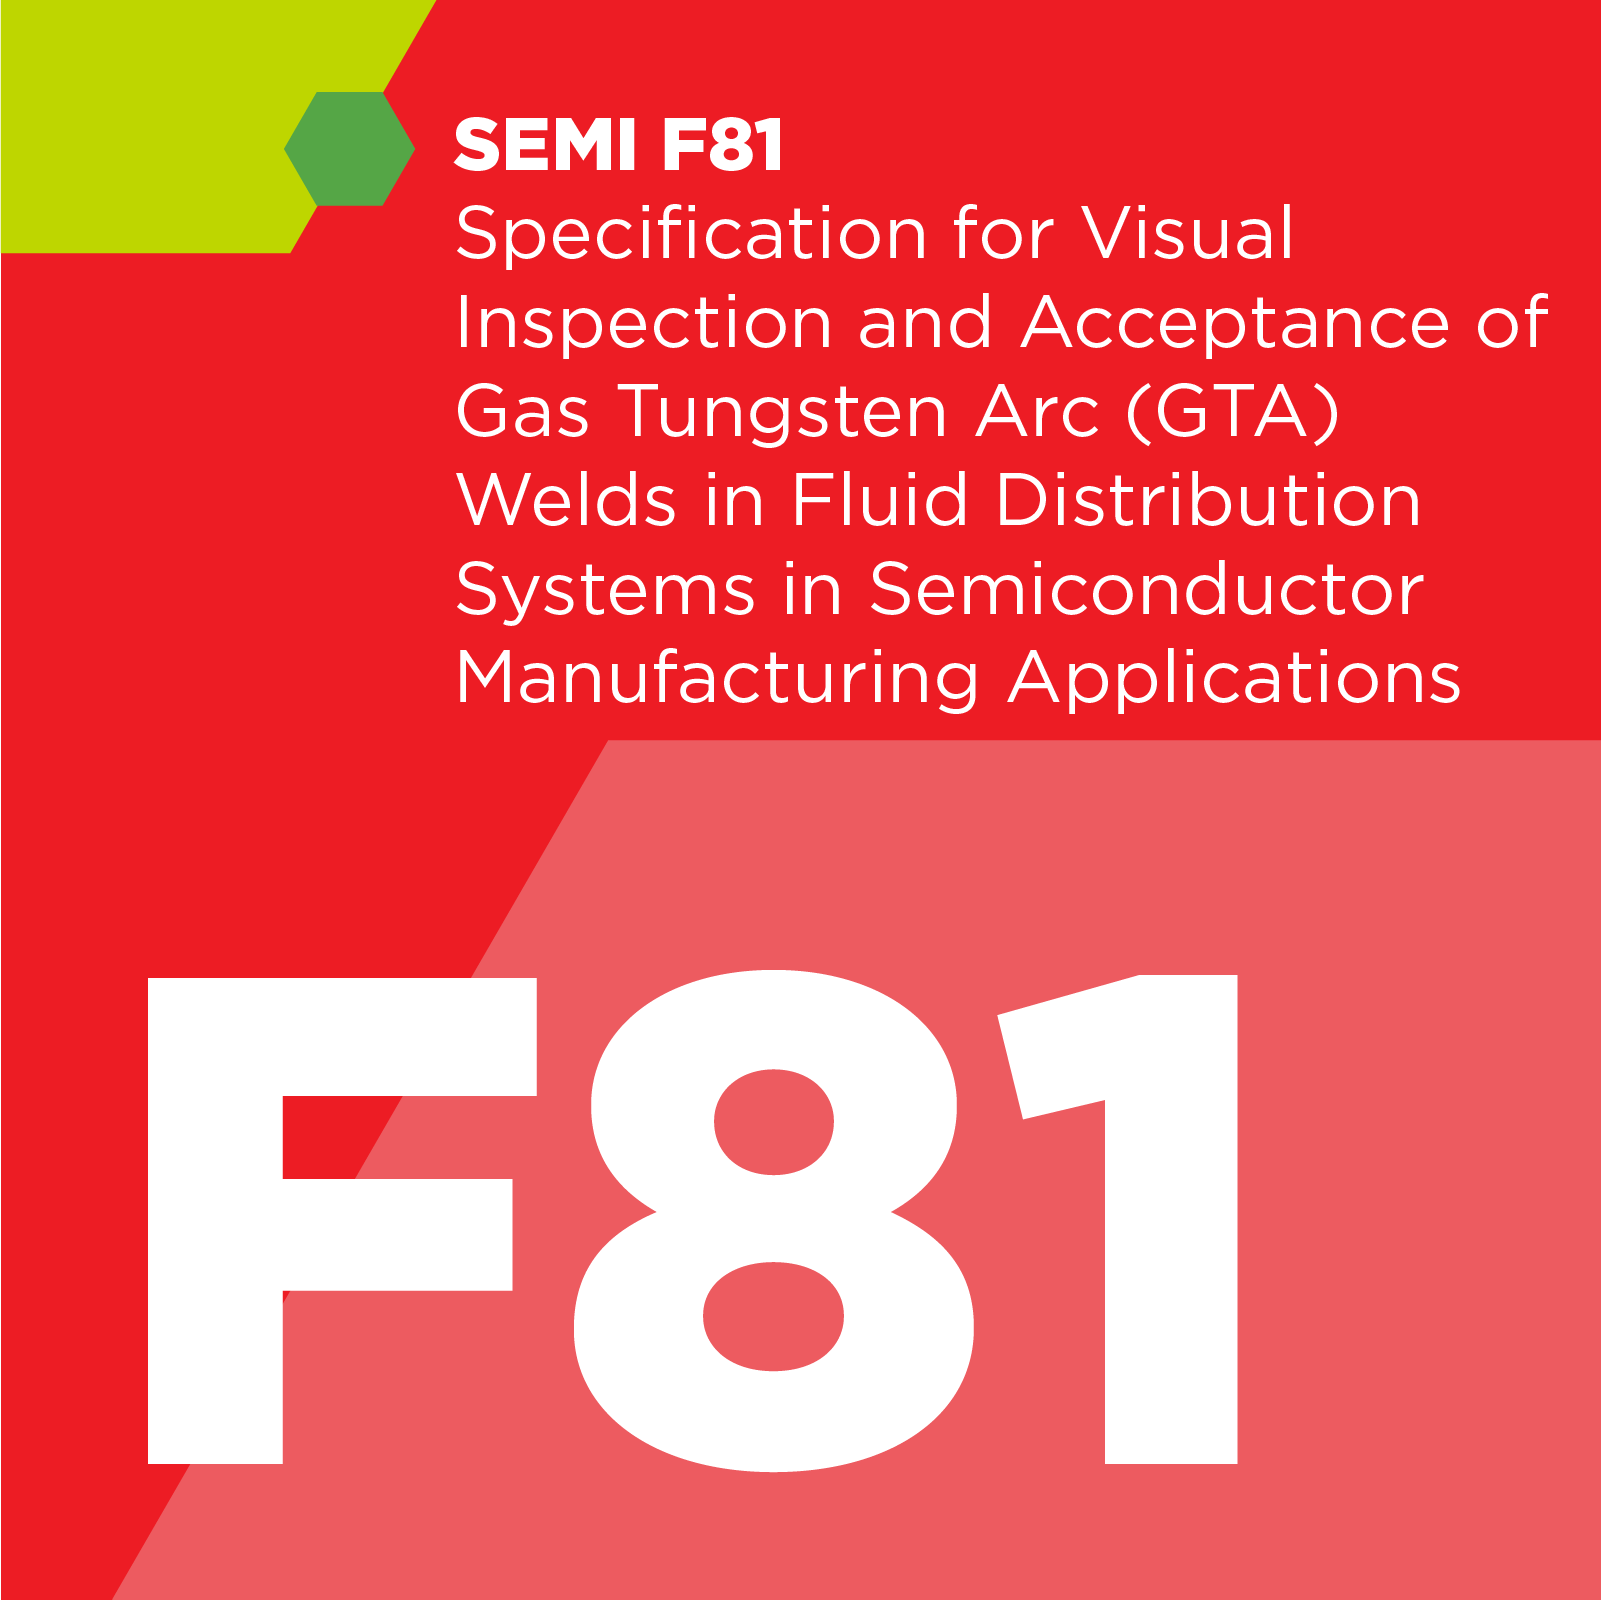 F08100 - SEMI F81 - Specification for Visual Inspection and Acceptance of Gas Tungsten Arc (GTA) Welds in Fluid Distribution Systems in Semiconductor Manufacturing Applications